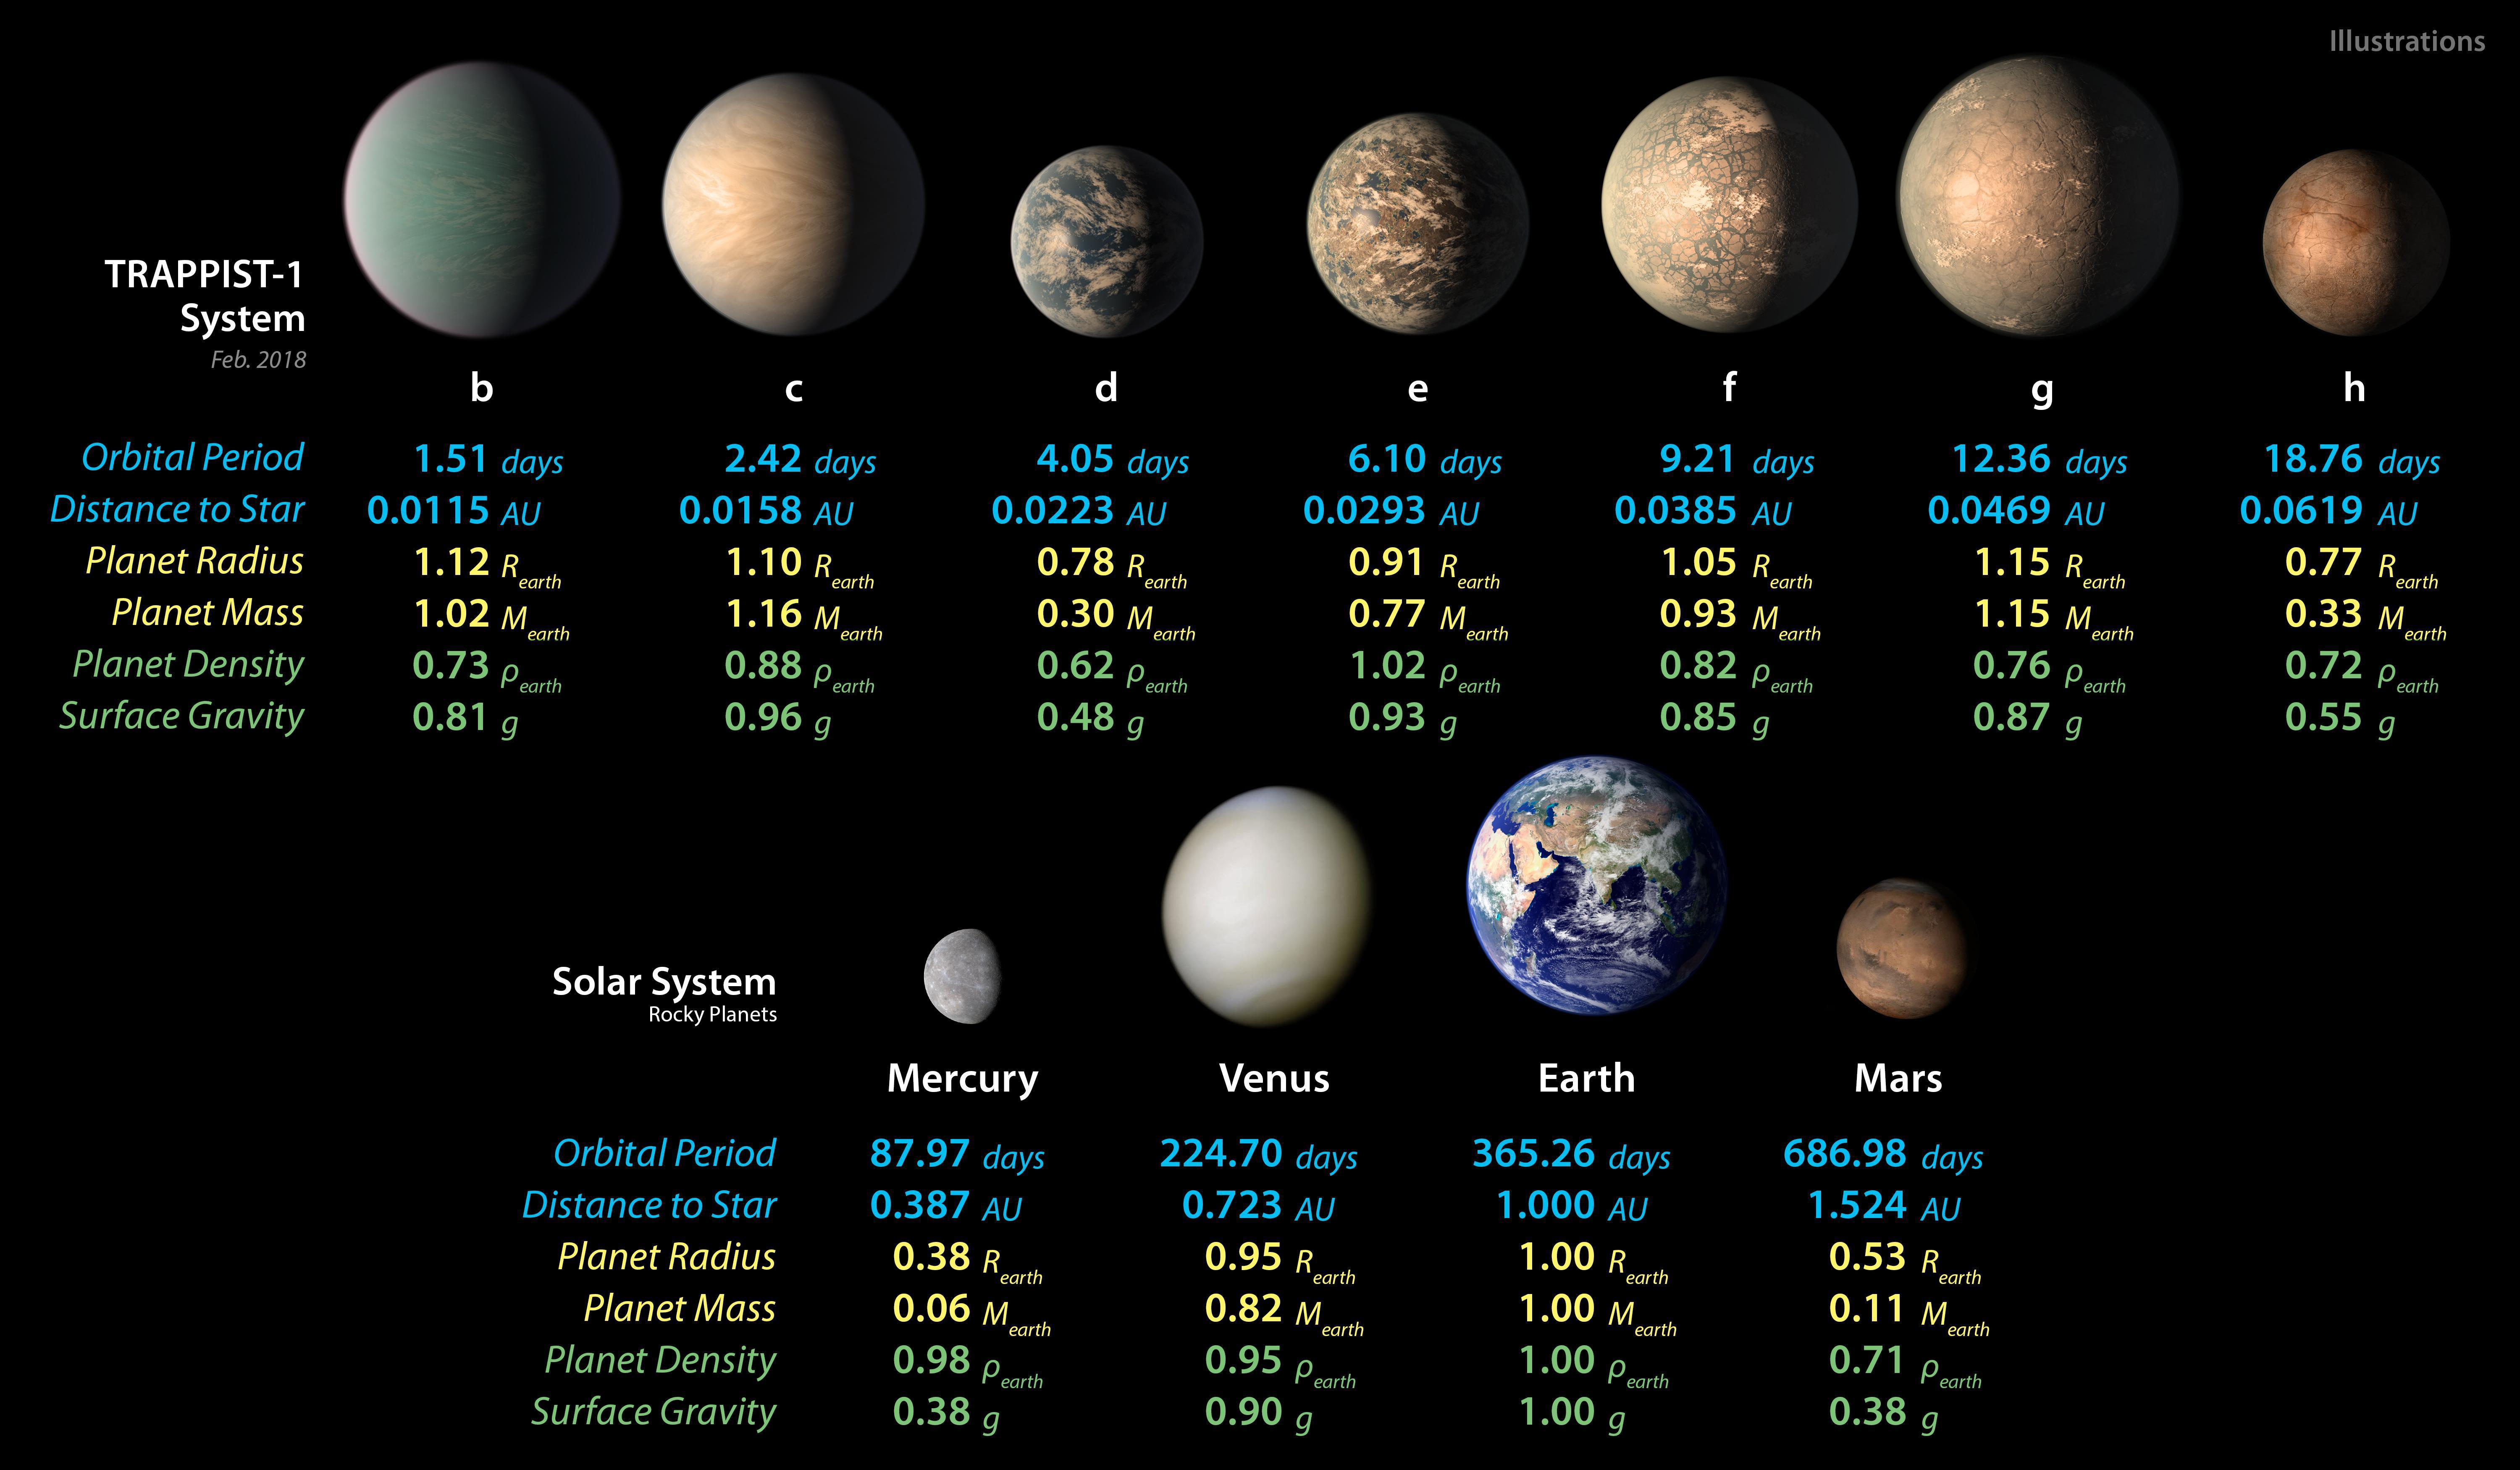 solar system planets in order of size